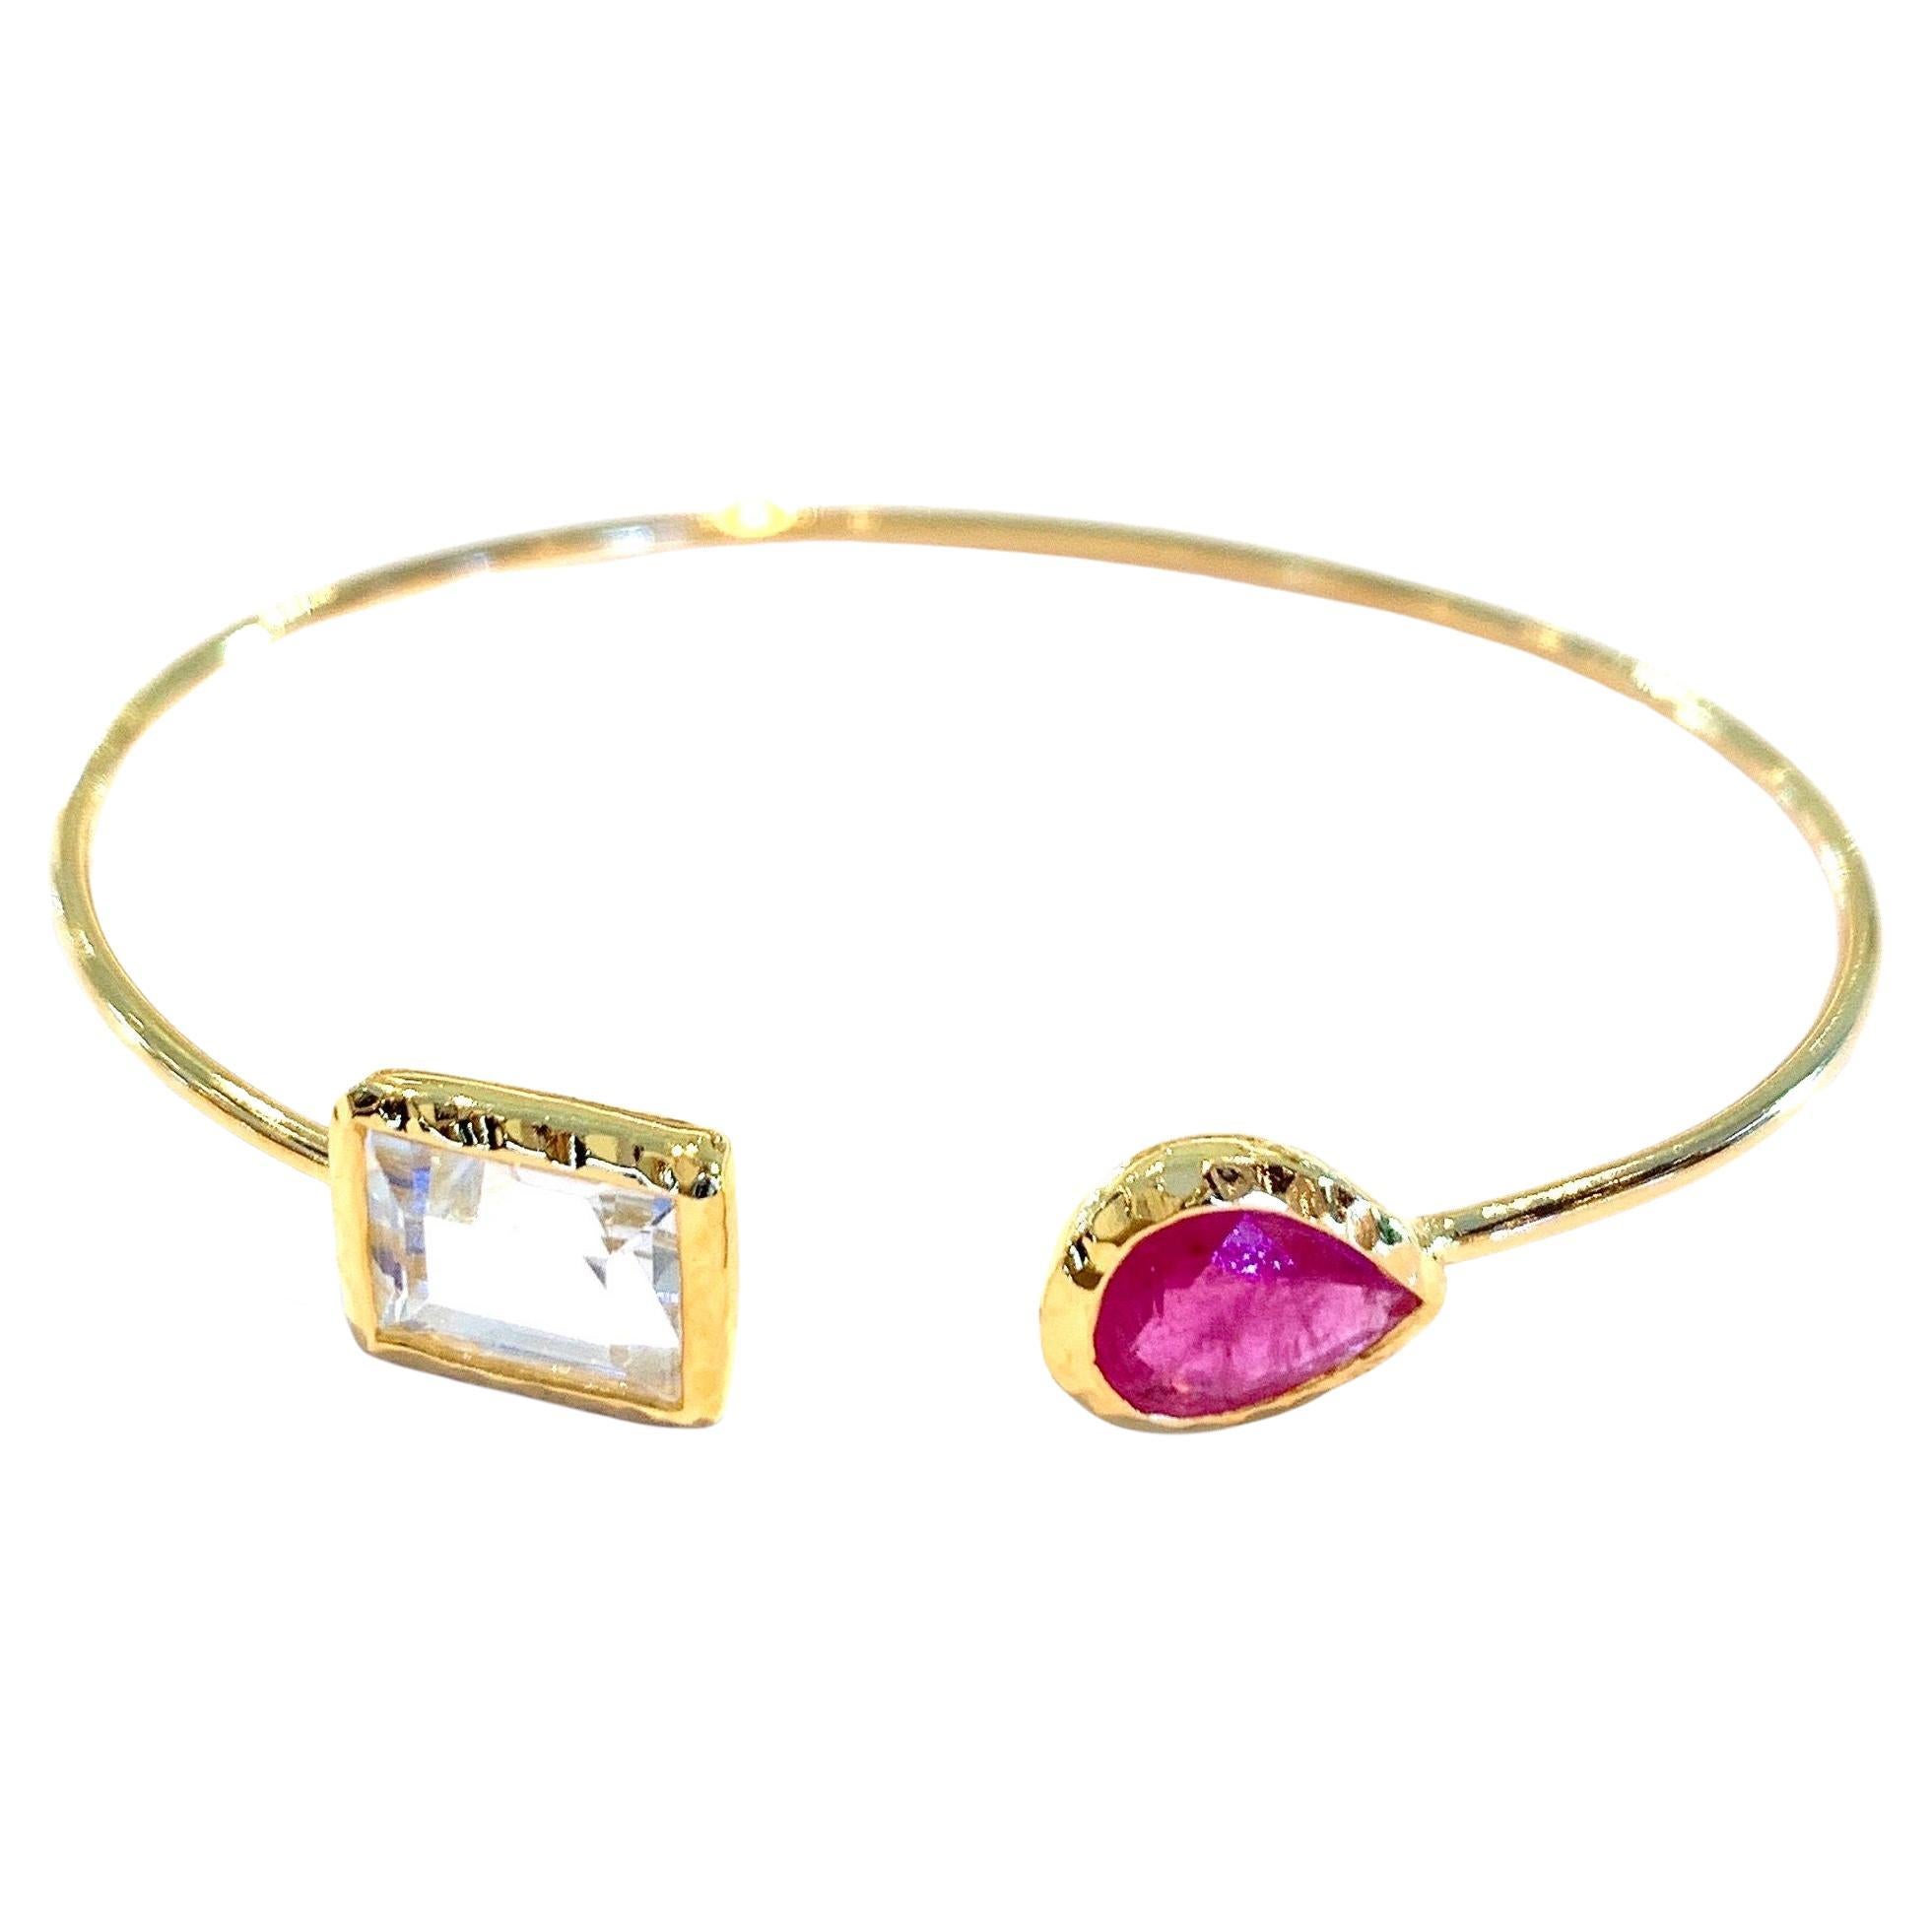 Bochic “Jungle” Bangle White Step Cut Topaz and Red Ruby, Silver & 22k Gold For Sale